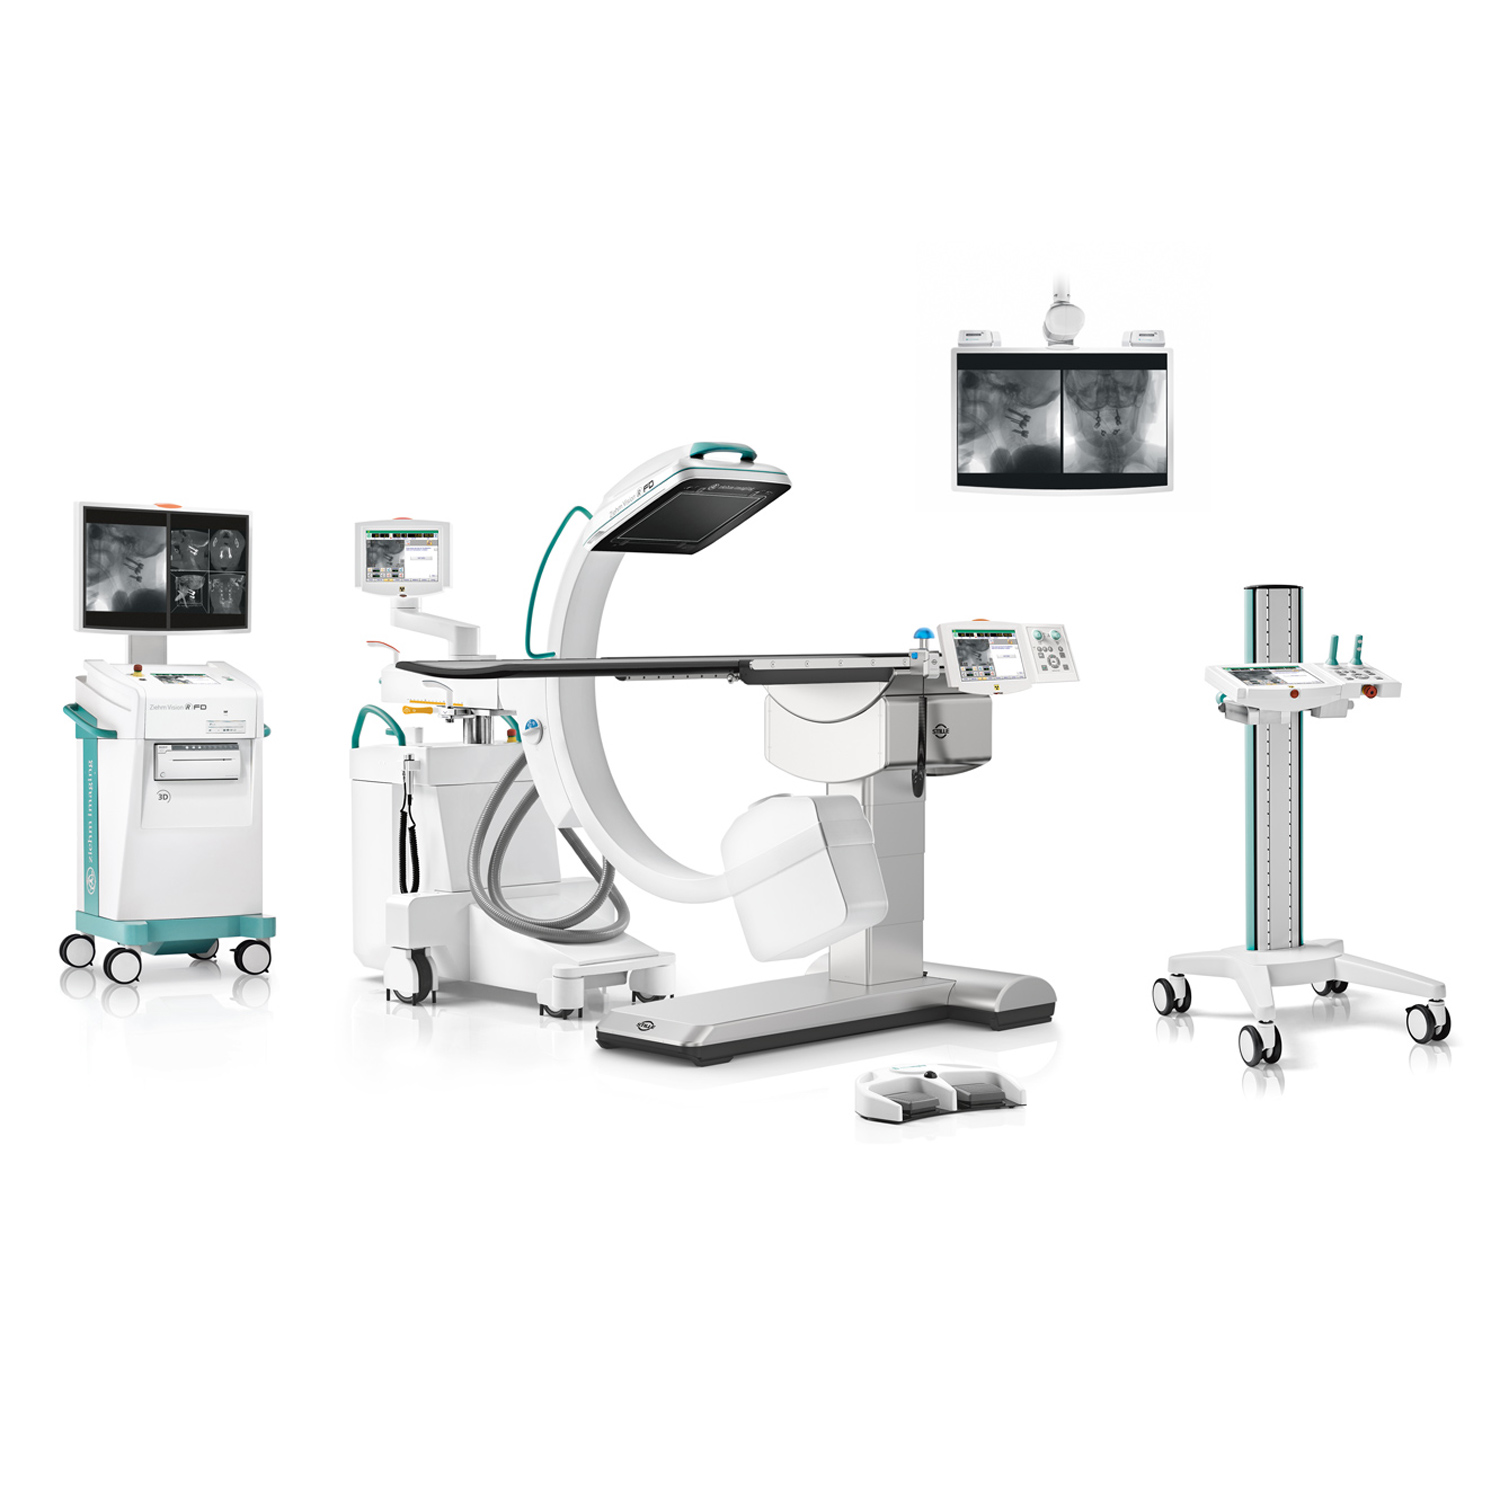 Ziehm Vision RFD 3D mobile C-arm with imaging table and control cart